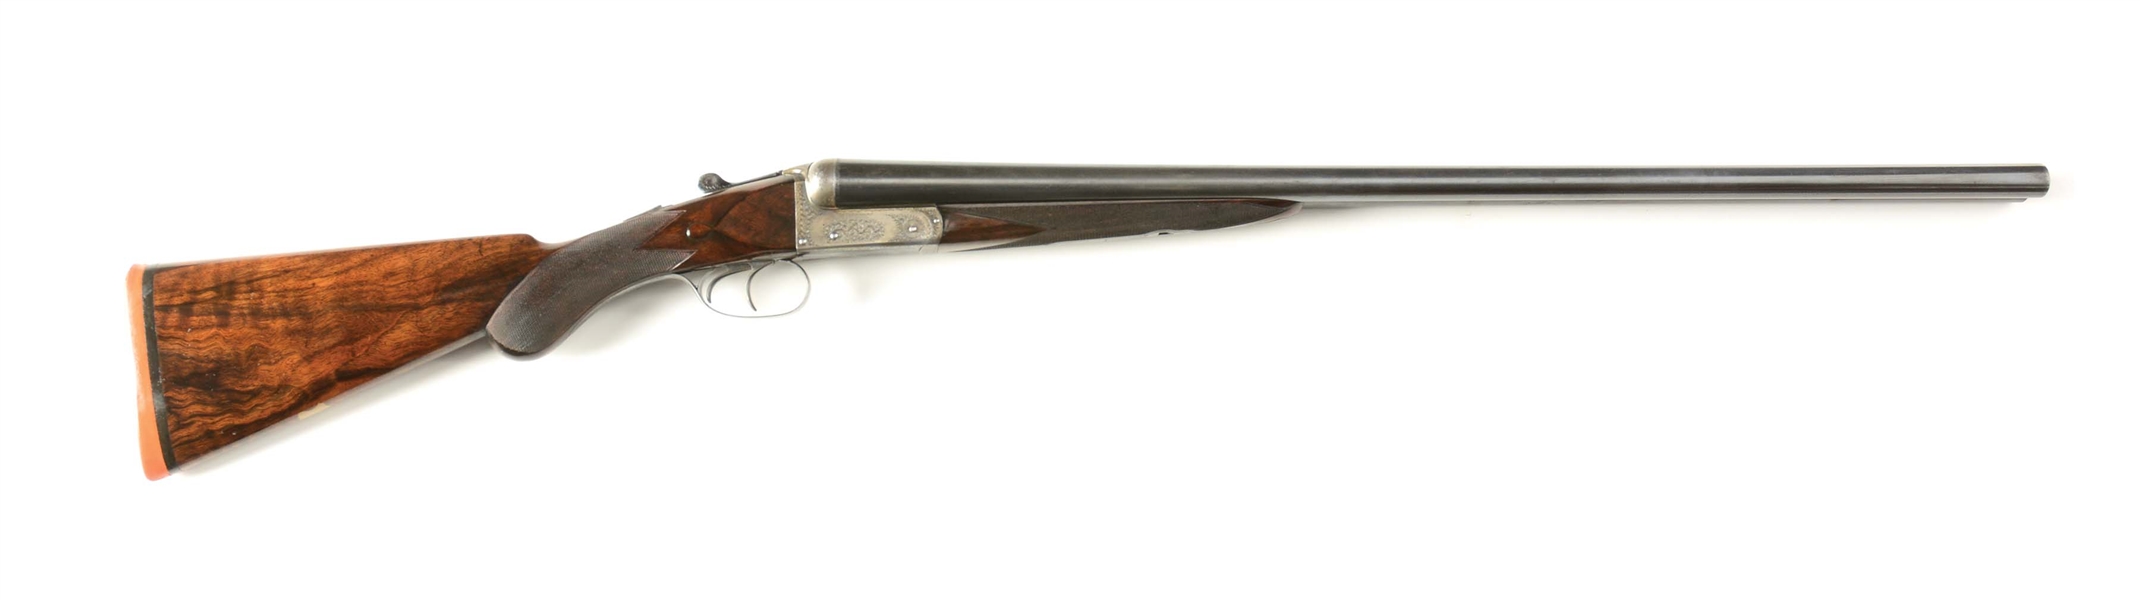 (C) WILLIAM CASHMORE BOXLOCK EJECTOR SIDE BY SIDE SHOTGUN.